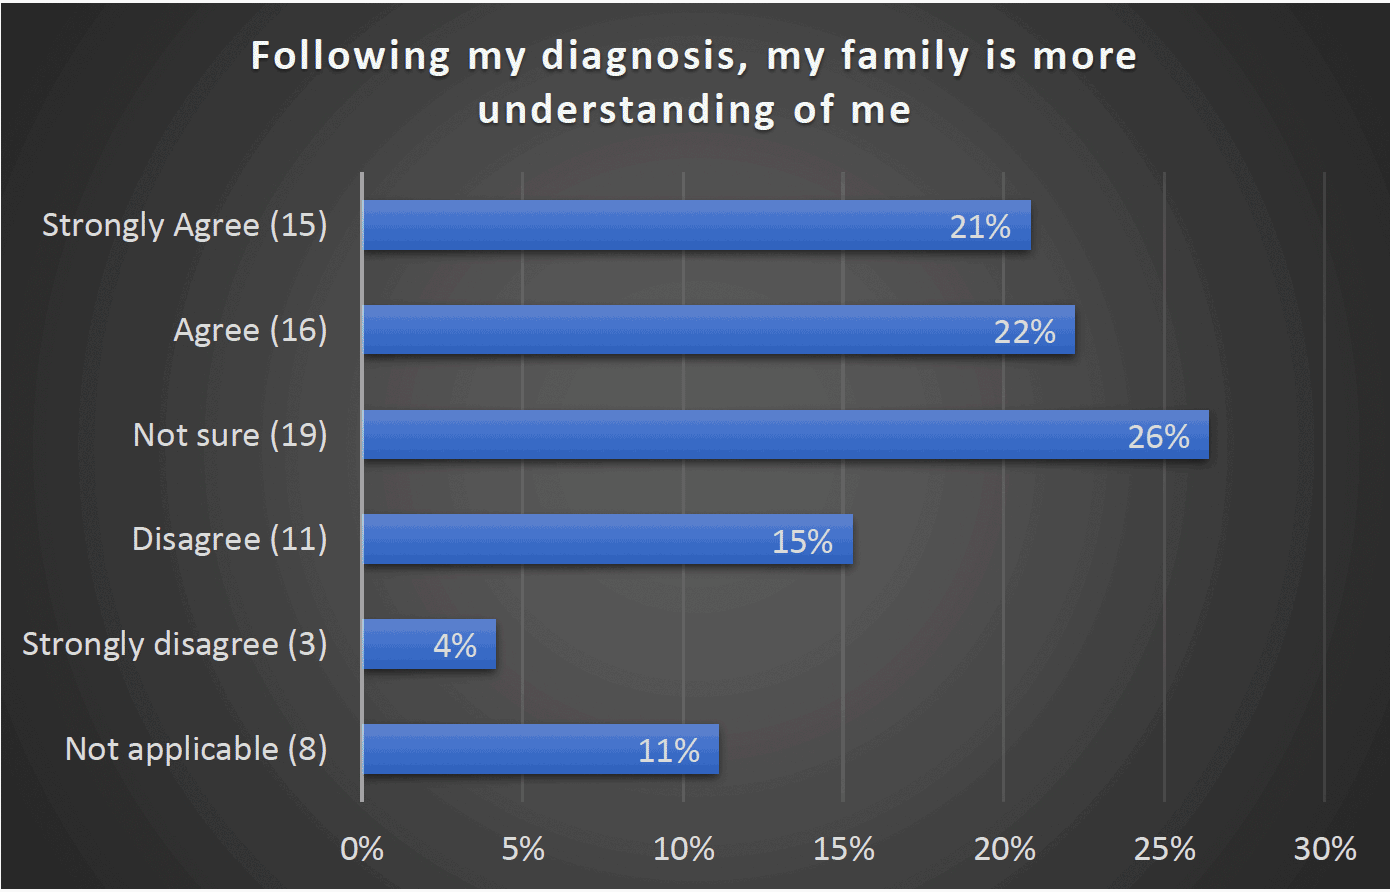 Following my diagnosis, my family is more understanding of me - Strongly Agree (15) 21%, Agree (16) 22%, Not sure (19) 26%, Disagree (11) 15%, Strongly disagree (3) 4%, Not applicable (8) 11%